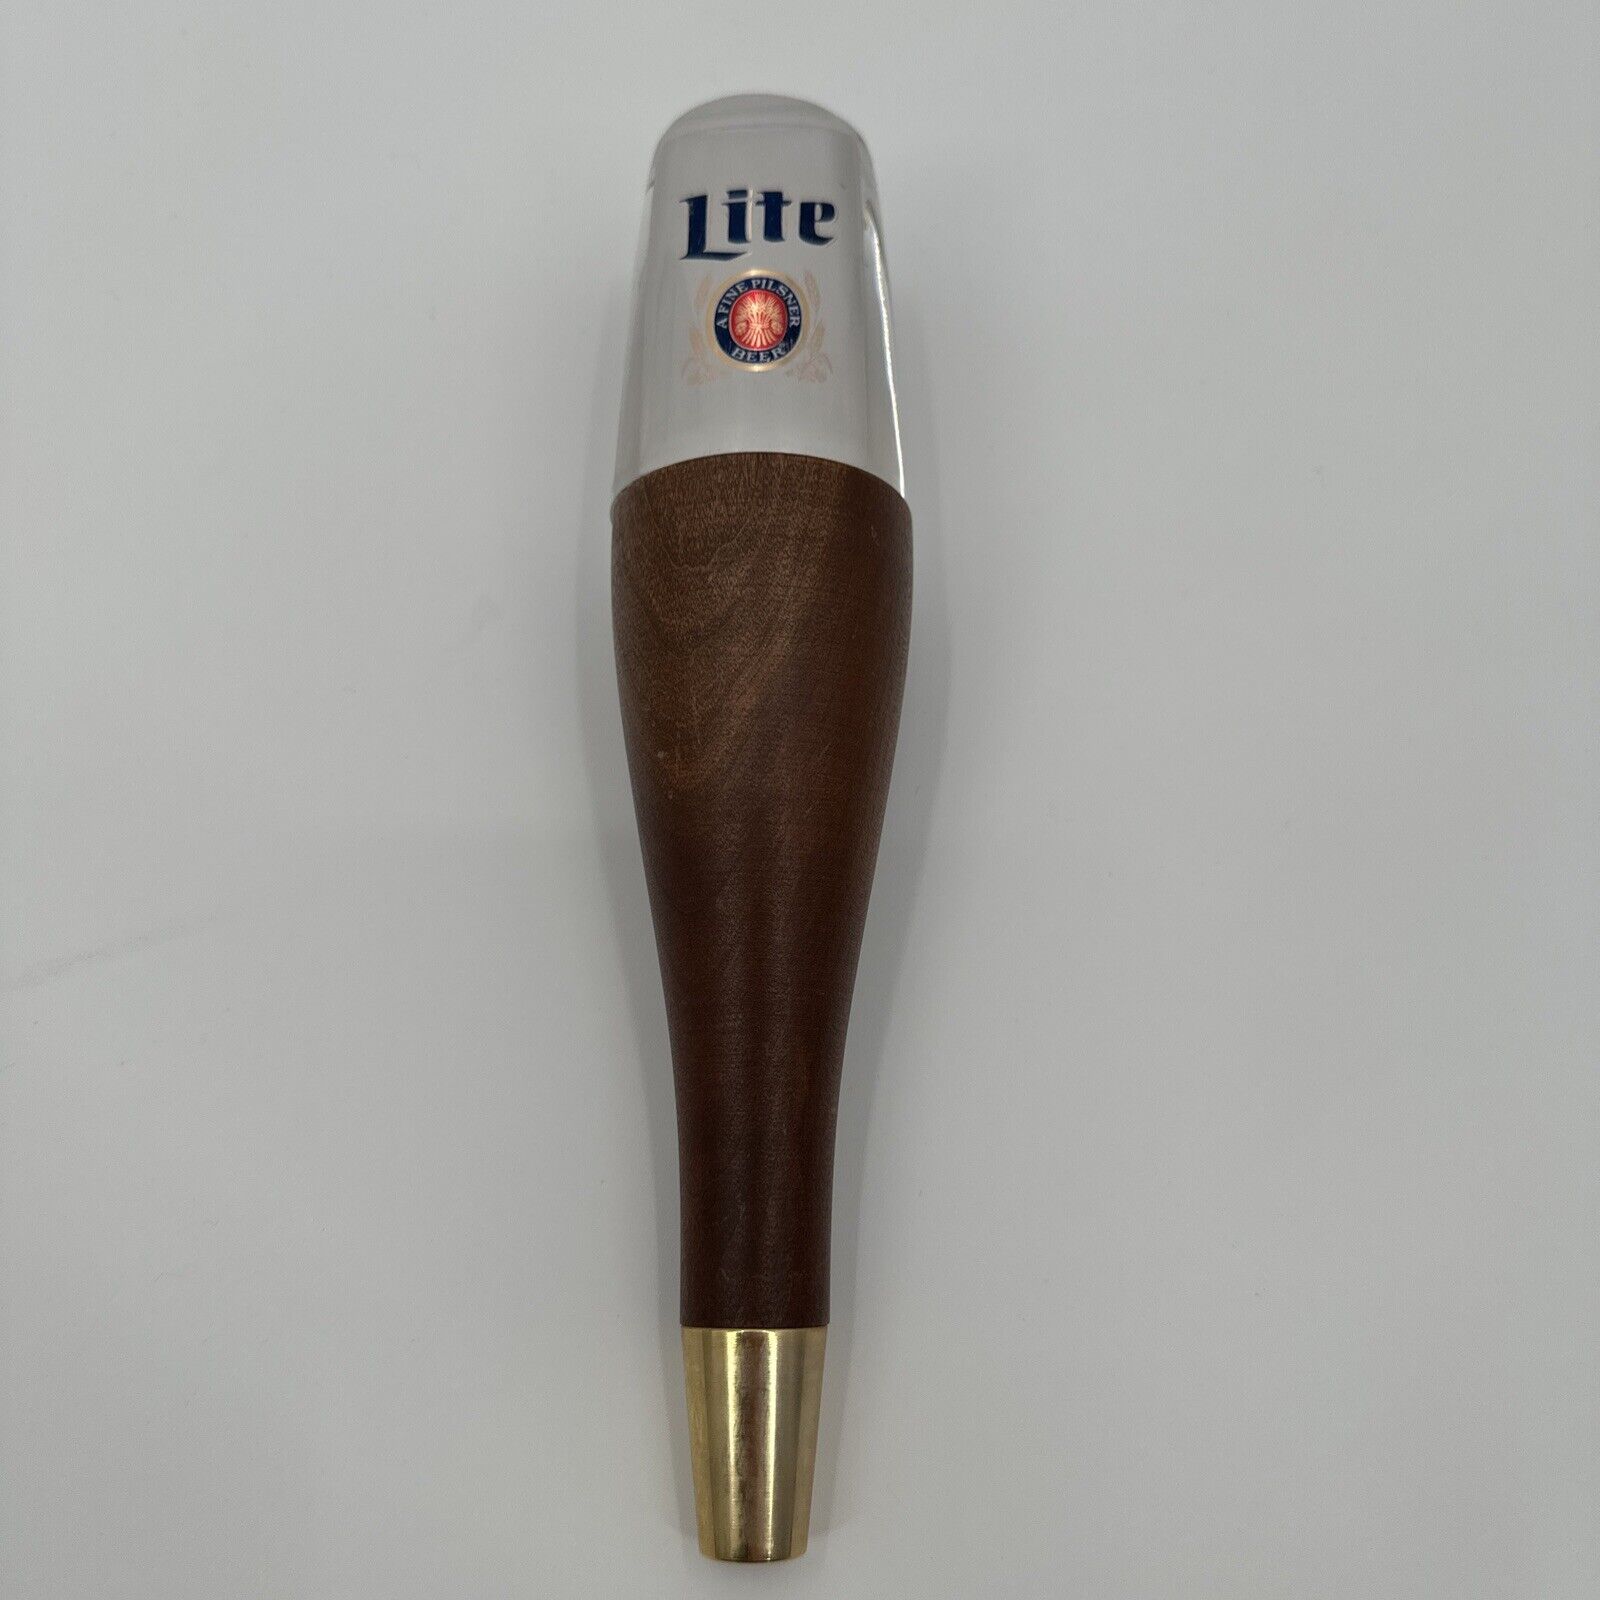 Very Rare Vintage MILLER LITE Wood and Acrylic Beer Tap Handle Pull Man Cave